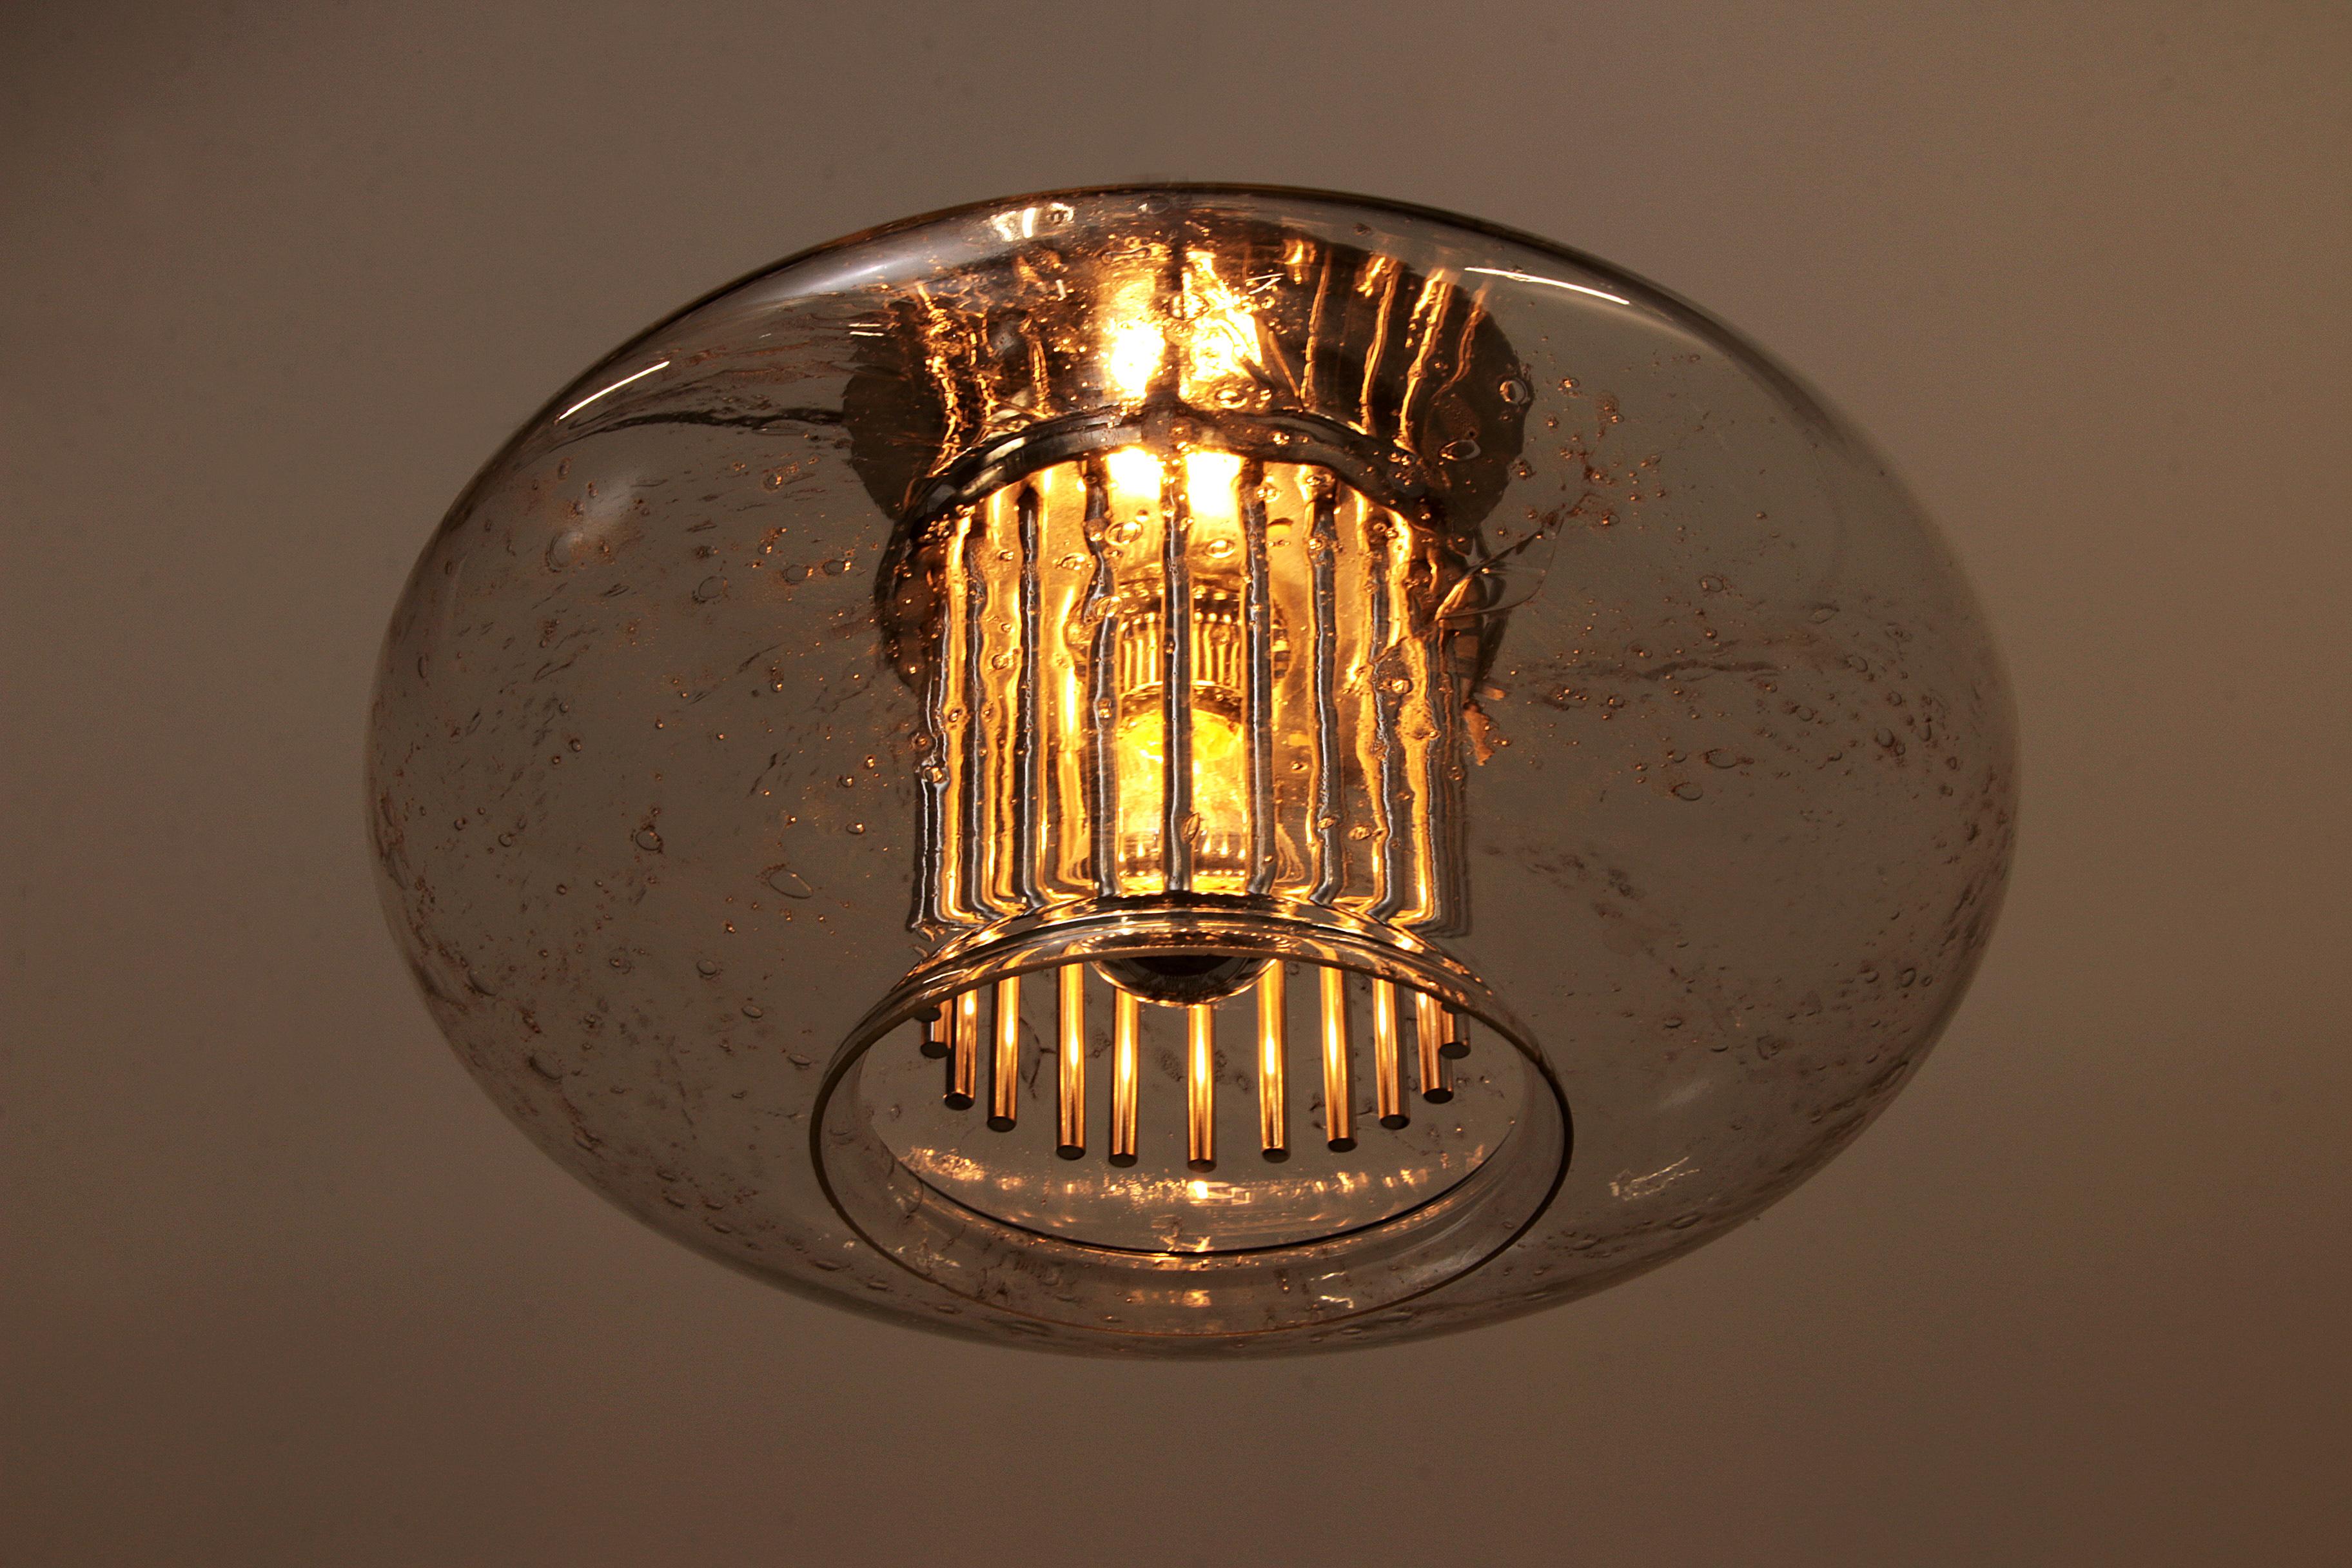 Glass Beautiful Doria Leuchten Ceiling Lamp with Chrome Accents, 1960 Germany